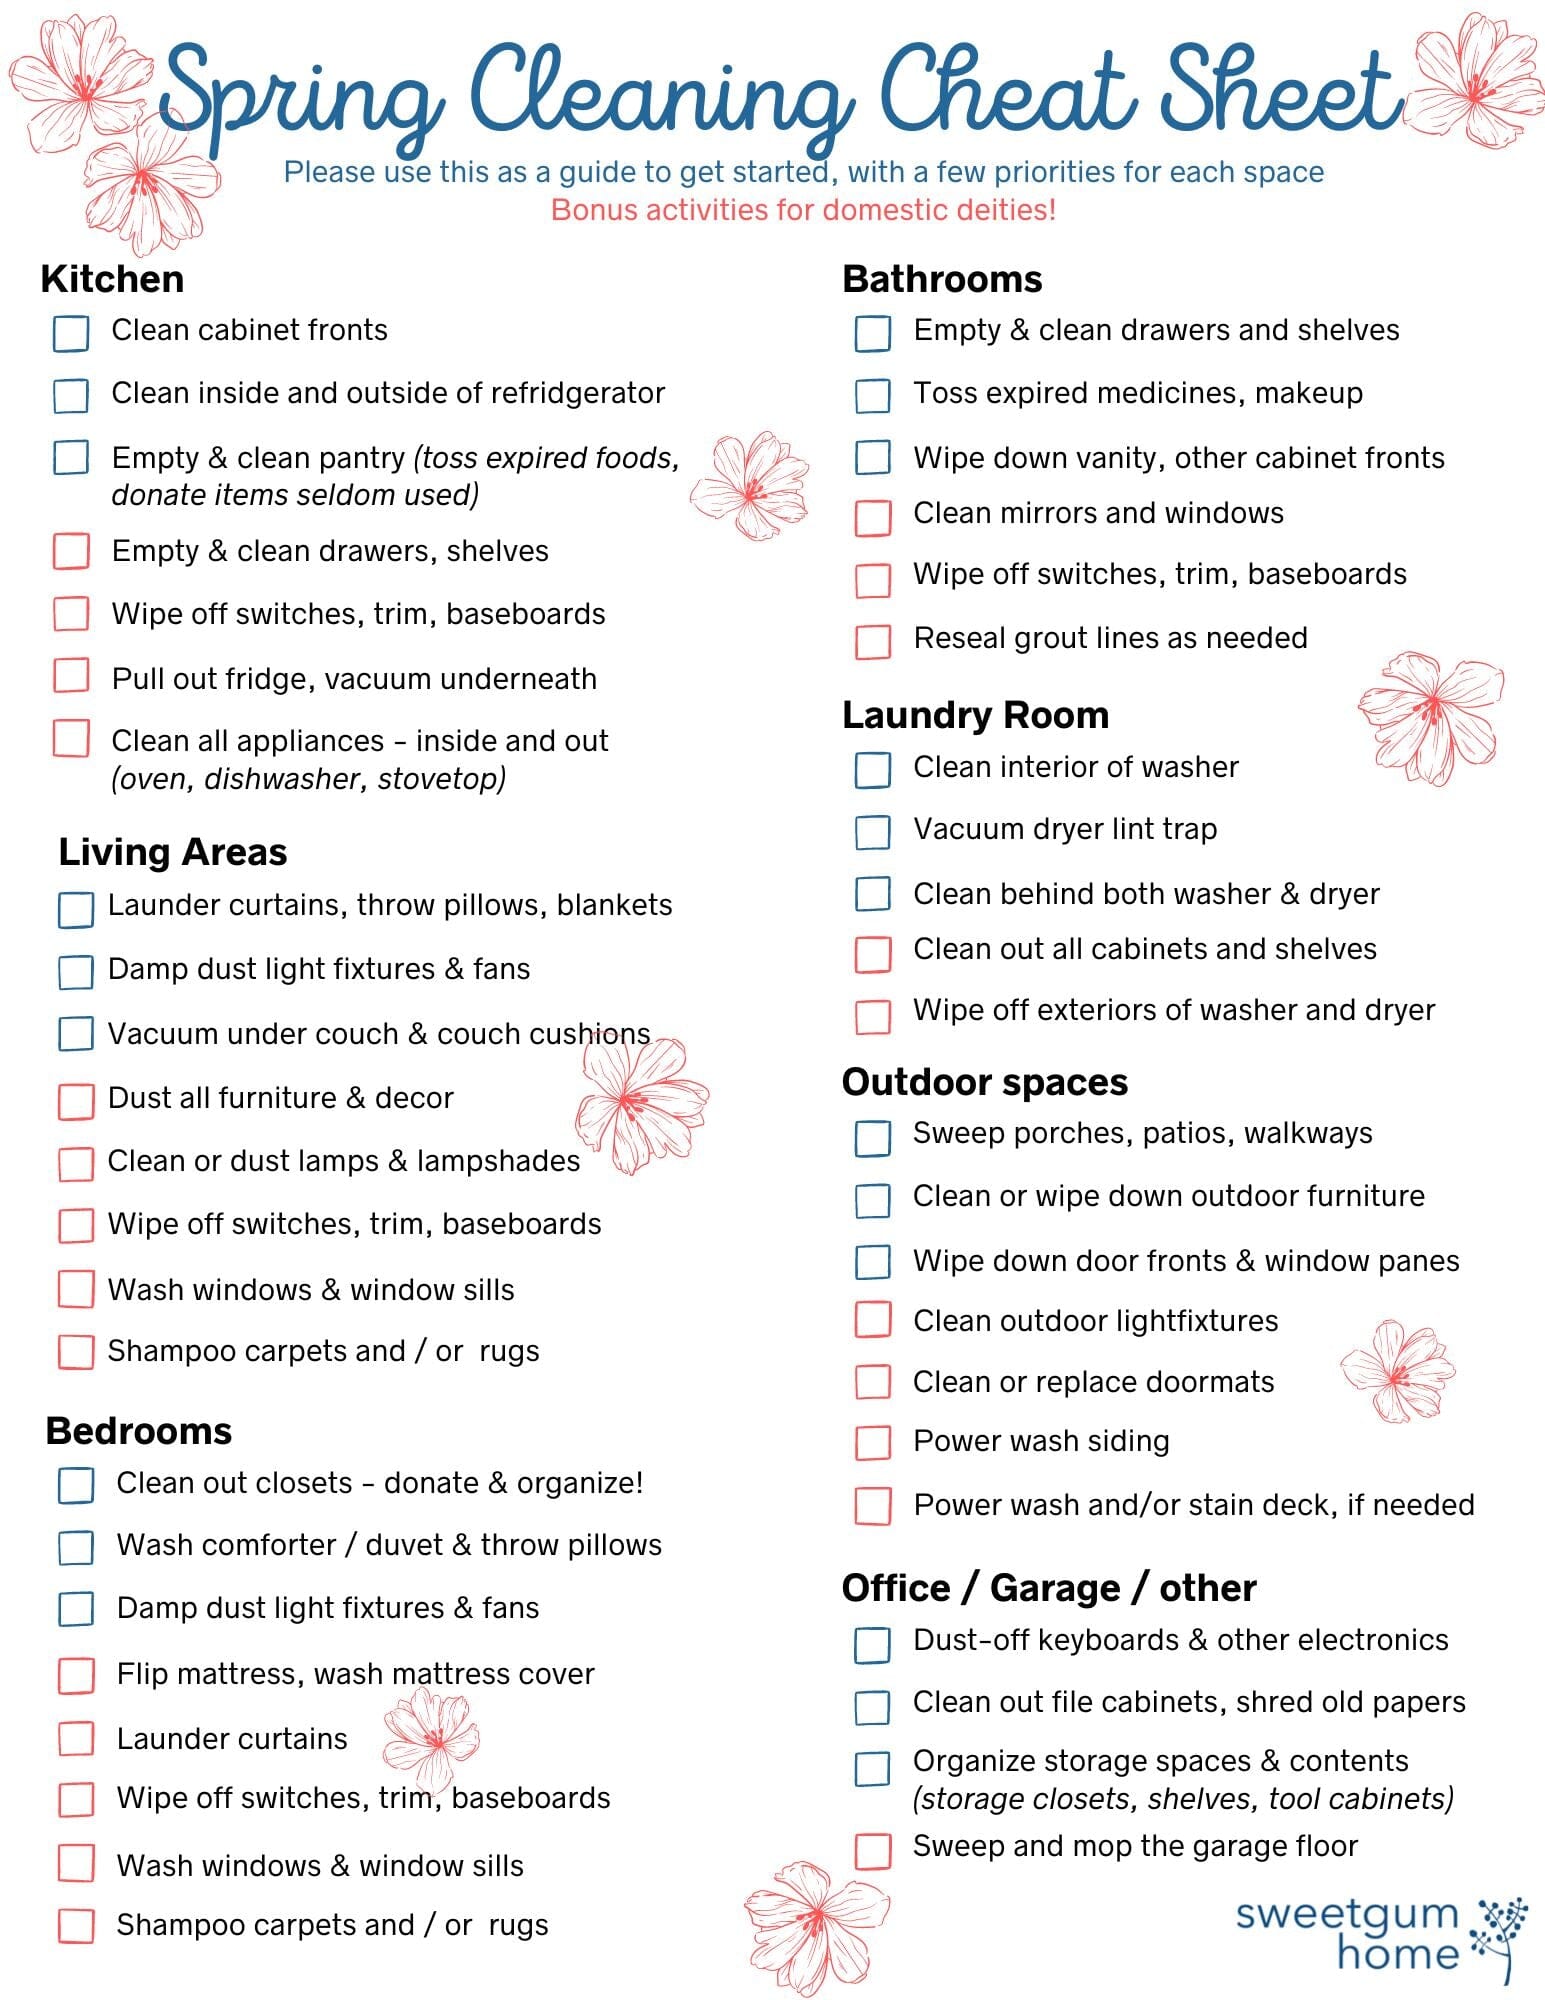 Spring Cleaning Cheat Sheet